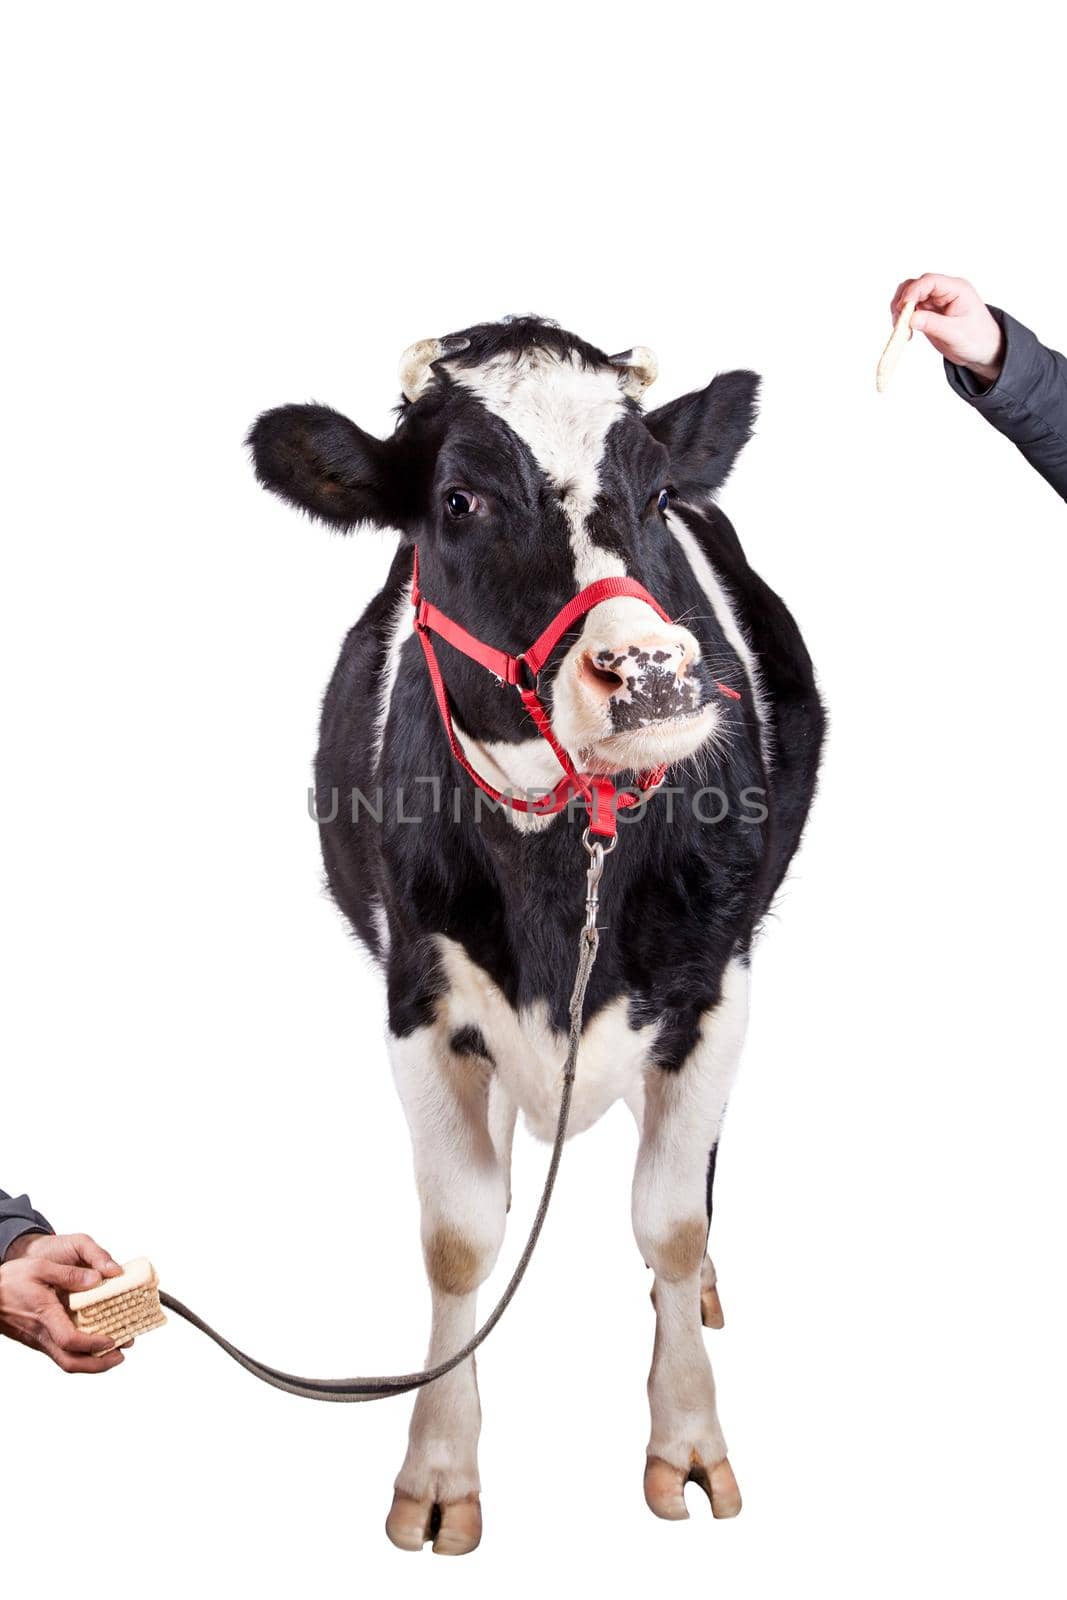 Scared Black and white cow Isolated On White background